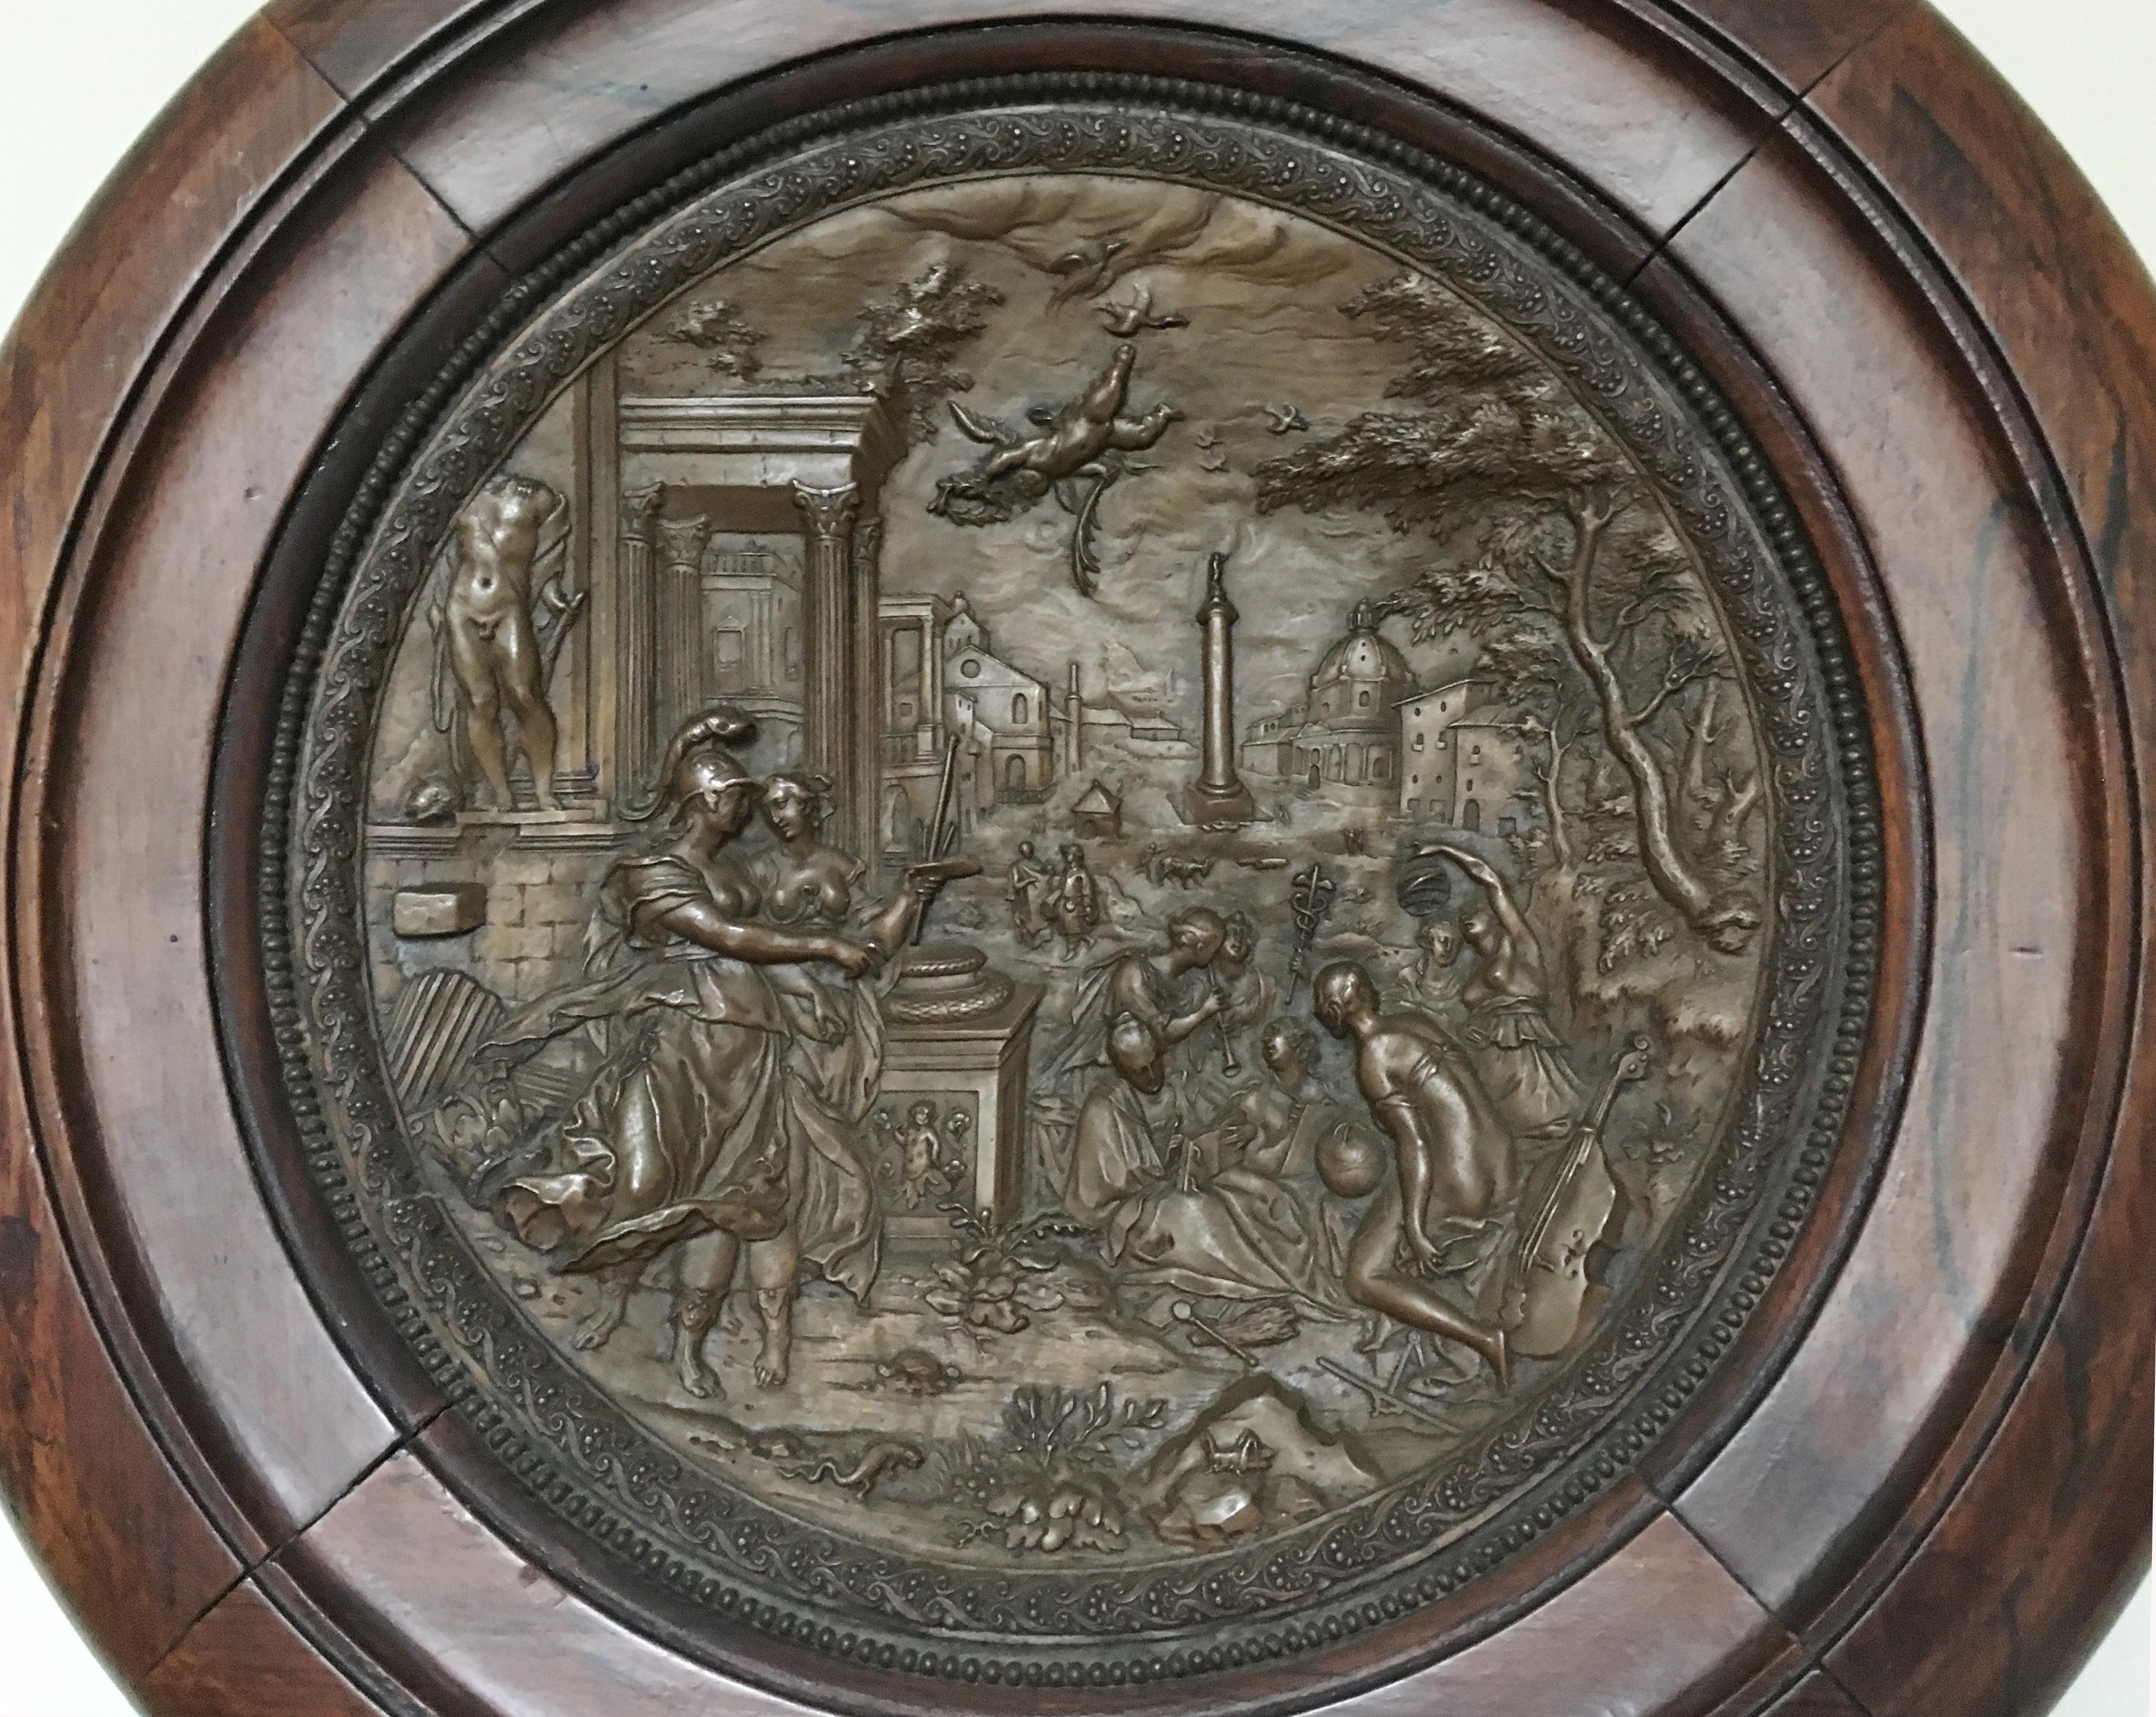 Extremely fine French bronze repousse wall medallion sculpture.
Late 19th century.

Bronze repousse medallion depicting a Roman city scene of civilians in the courtyard, near a Roman Centurion courting a maiden, cupids flying overhead, with